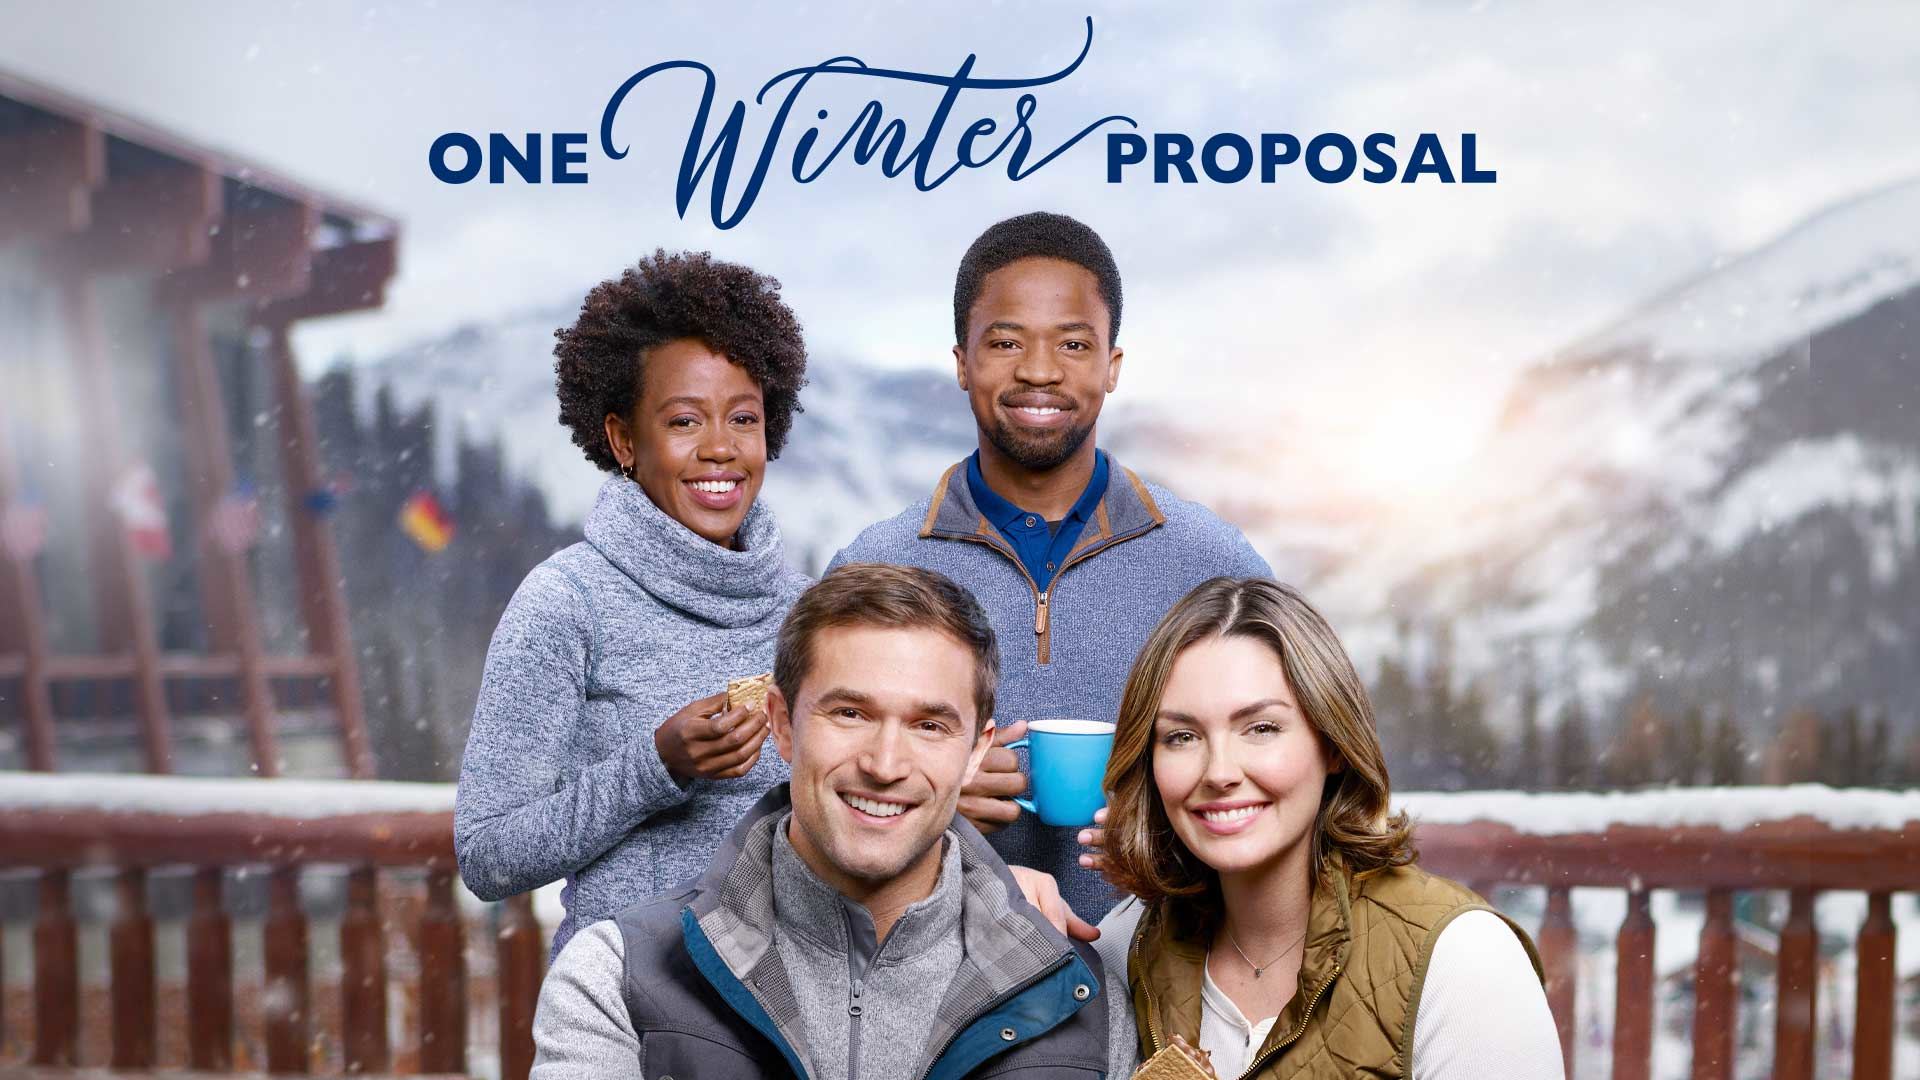 One Winter Proposal